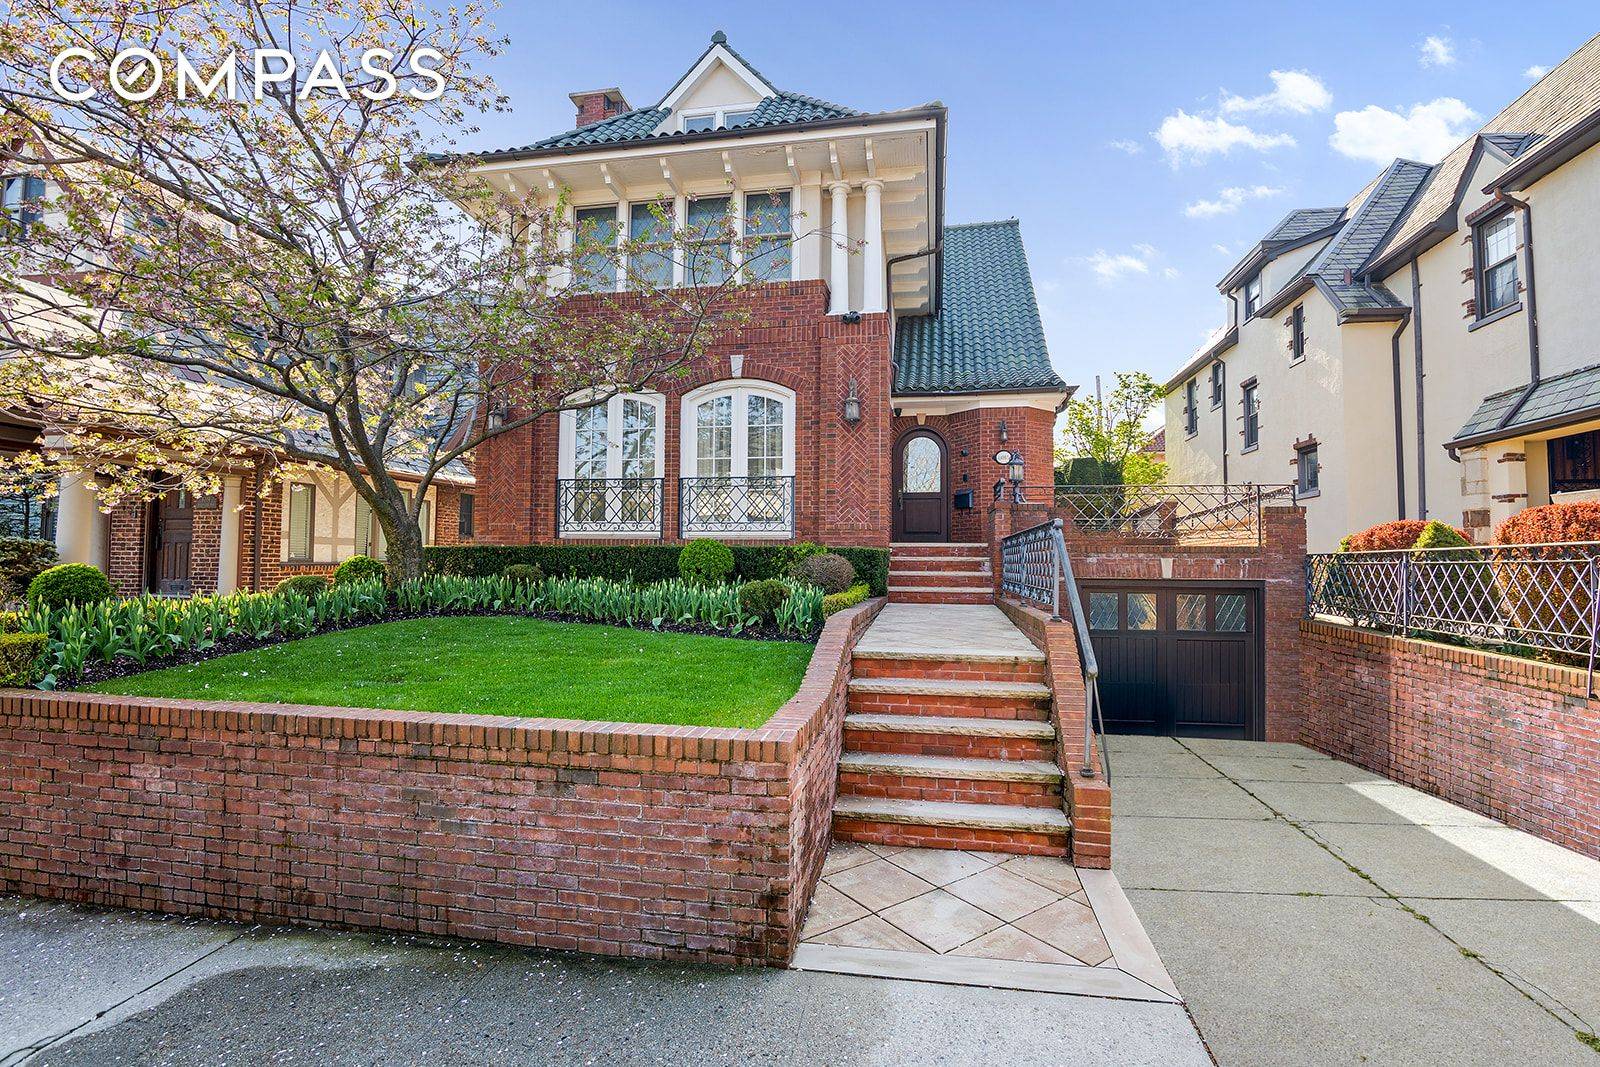 Your Brooklyn dream estate awaits in this exquisite five bedroom, four and a half bathroom residence located on the most desirable street in Bay Ridge.